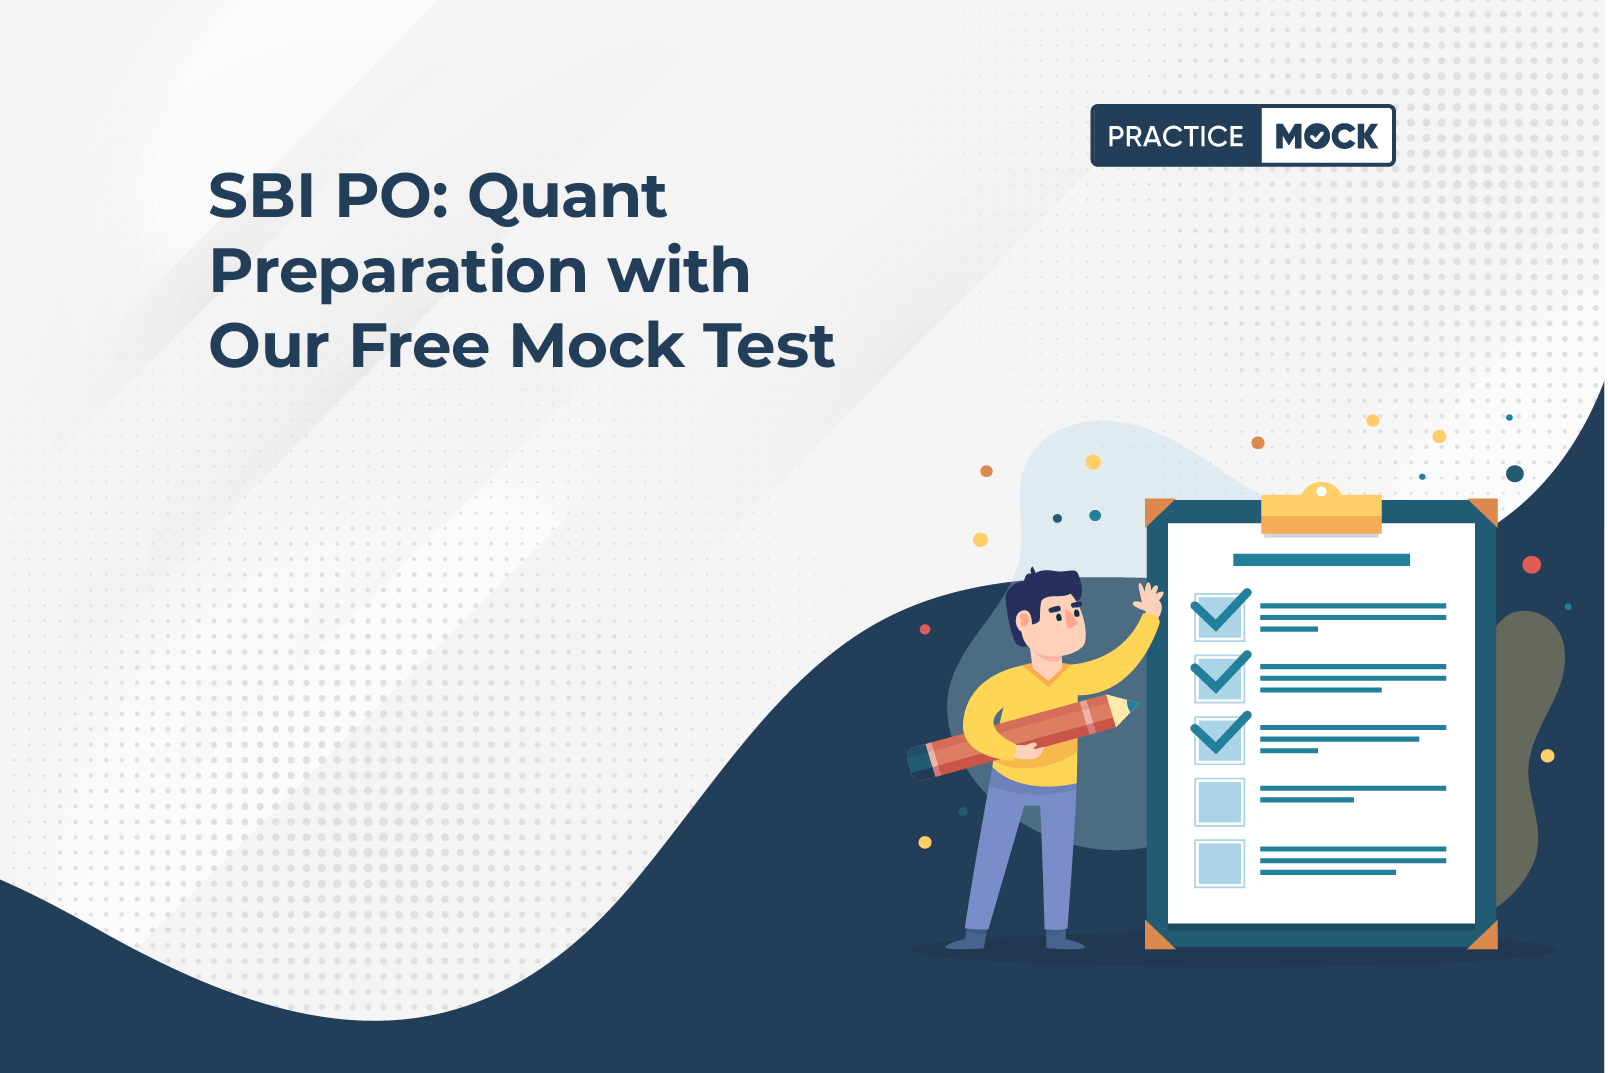 SBI PO Quant Preparation with Our Free Mock Test (1)